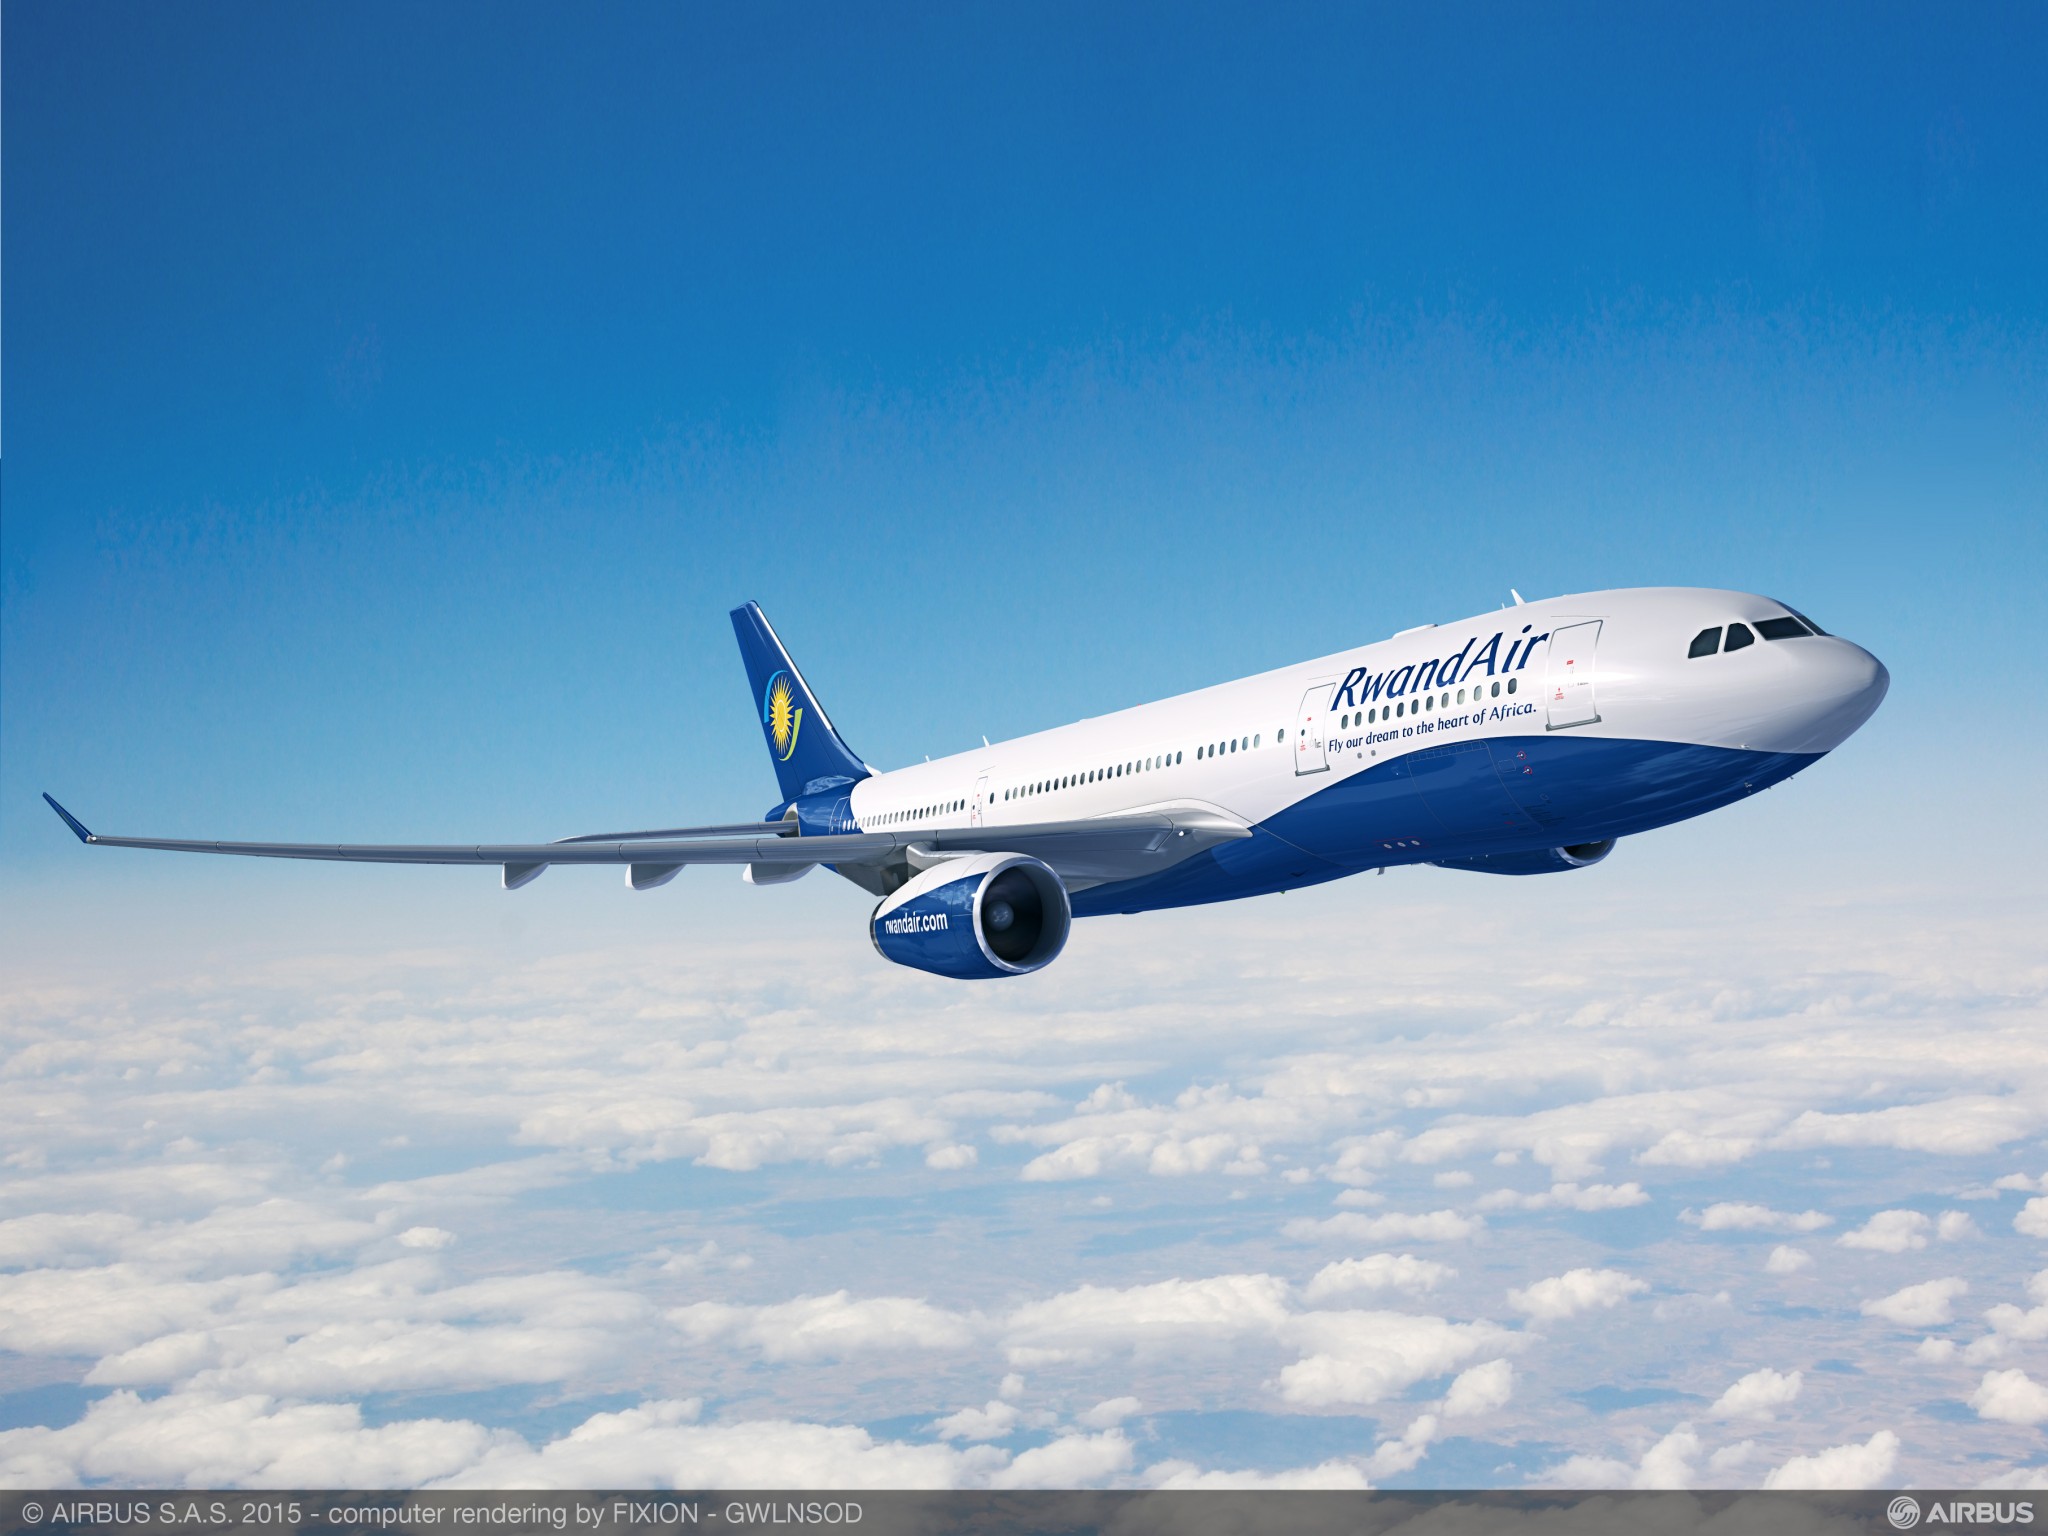 RwandAir to suspend flights temporarily to and from Guangzhou, China